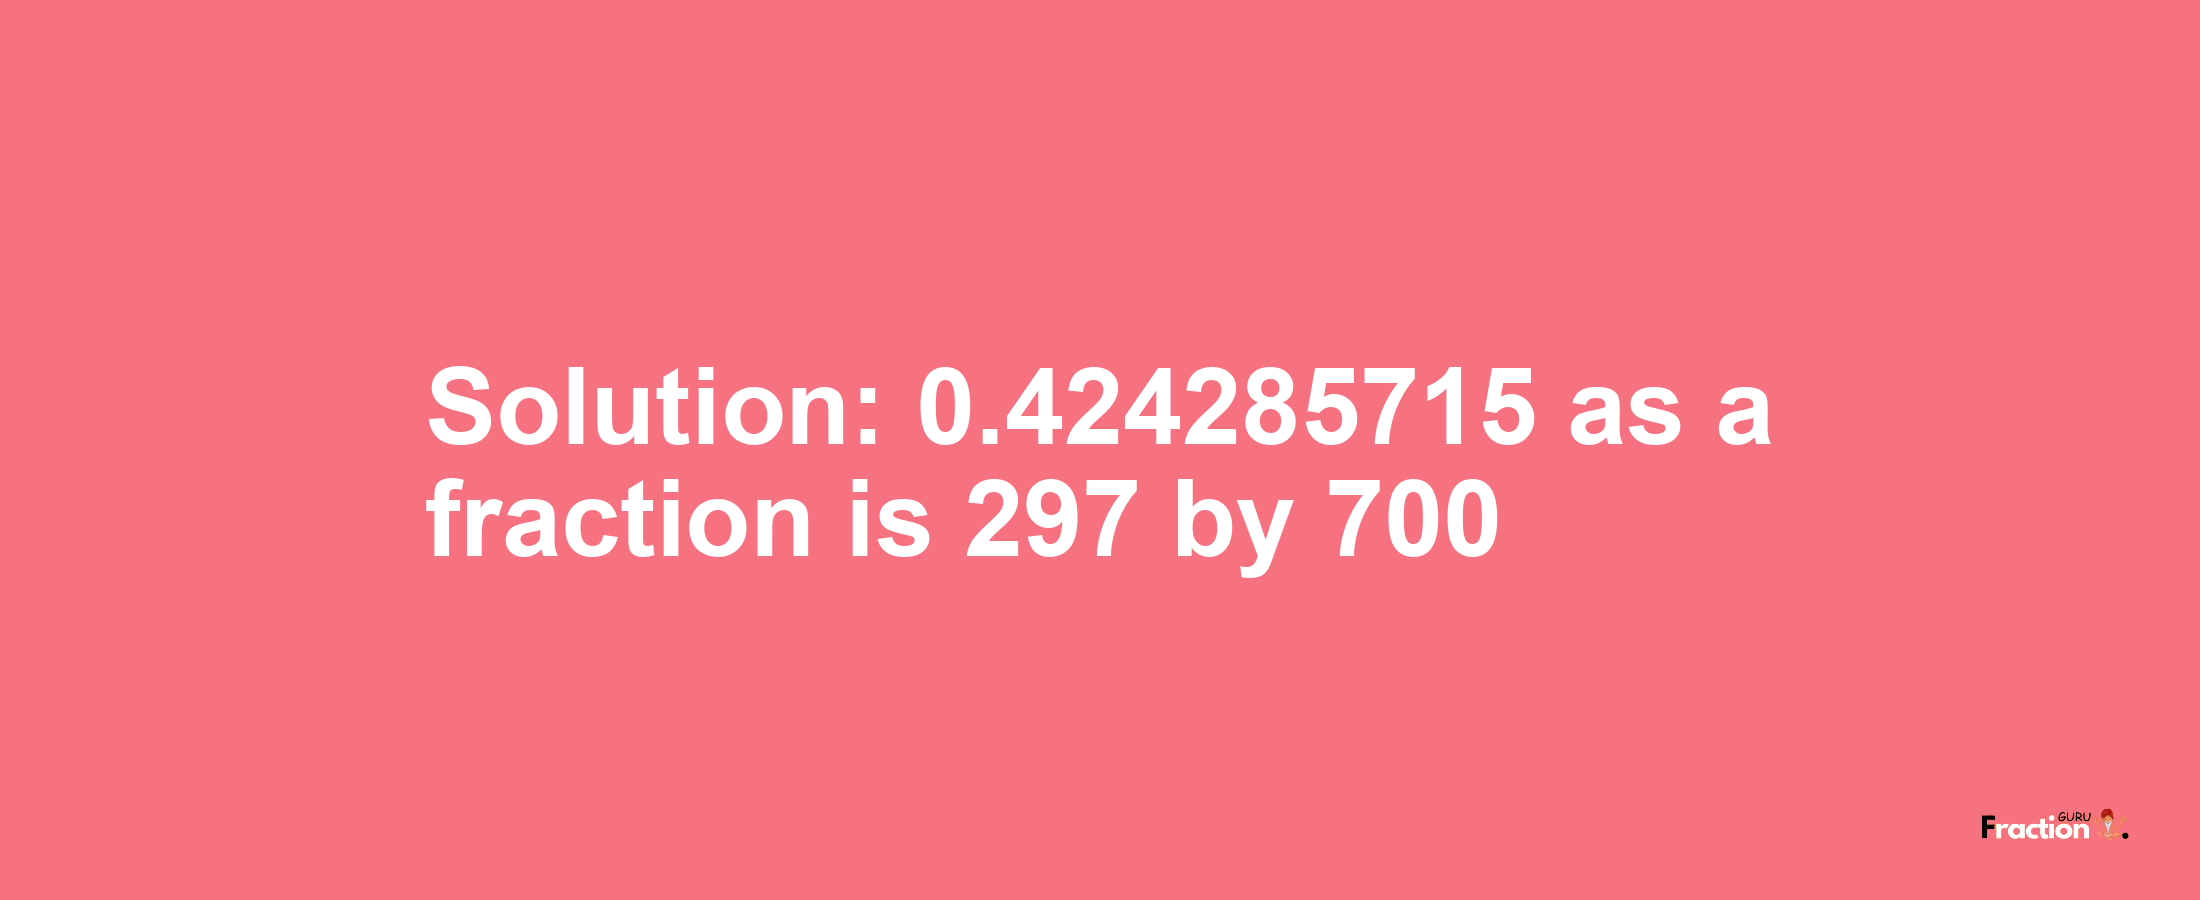 Solution:0.424285715 as a fraction is 297/700